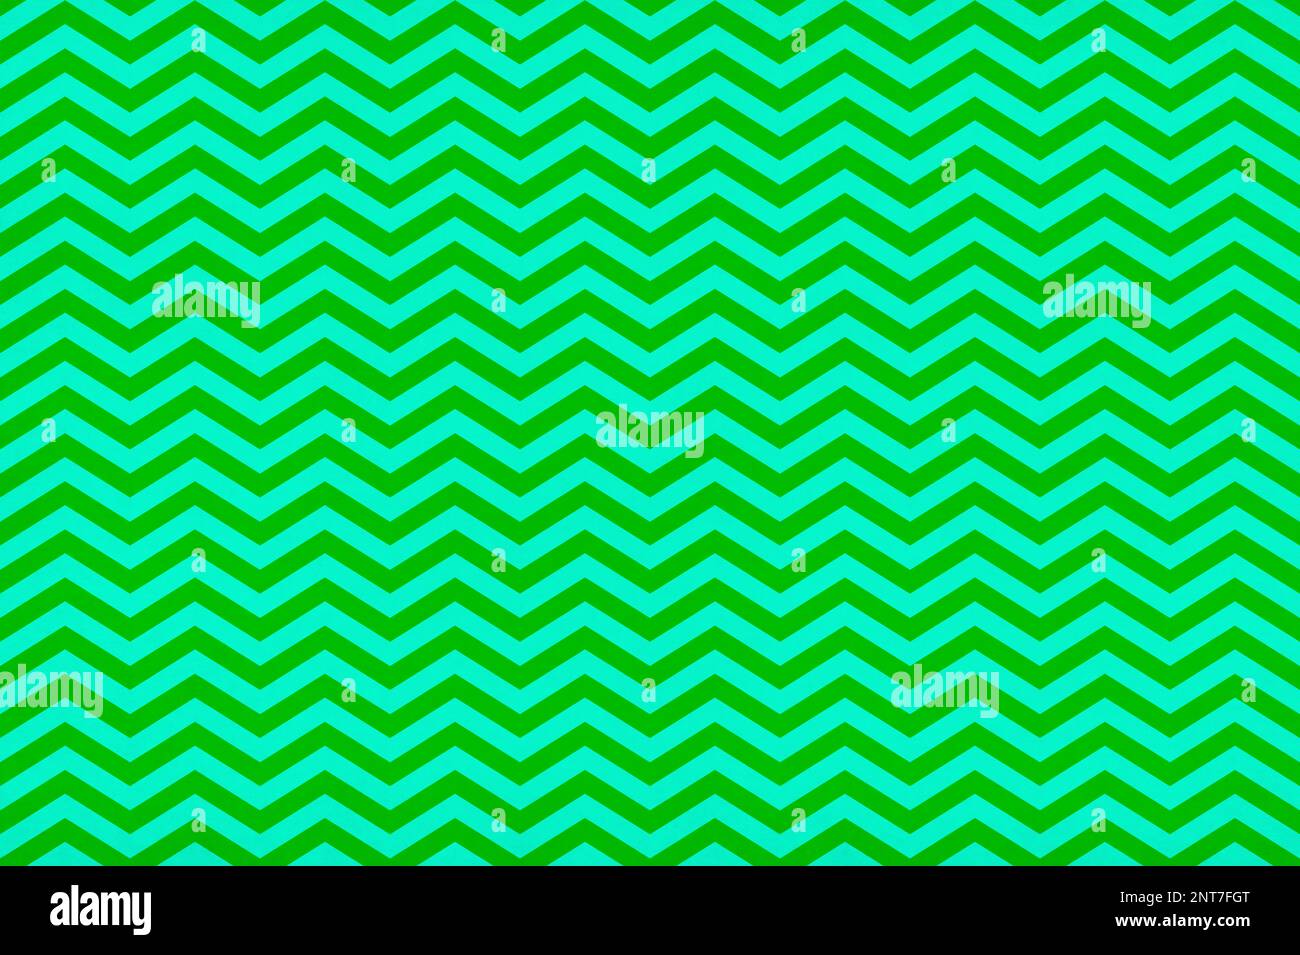 green and yellow chevron background